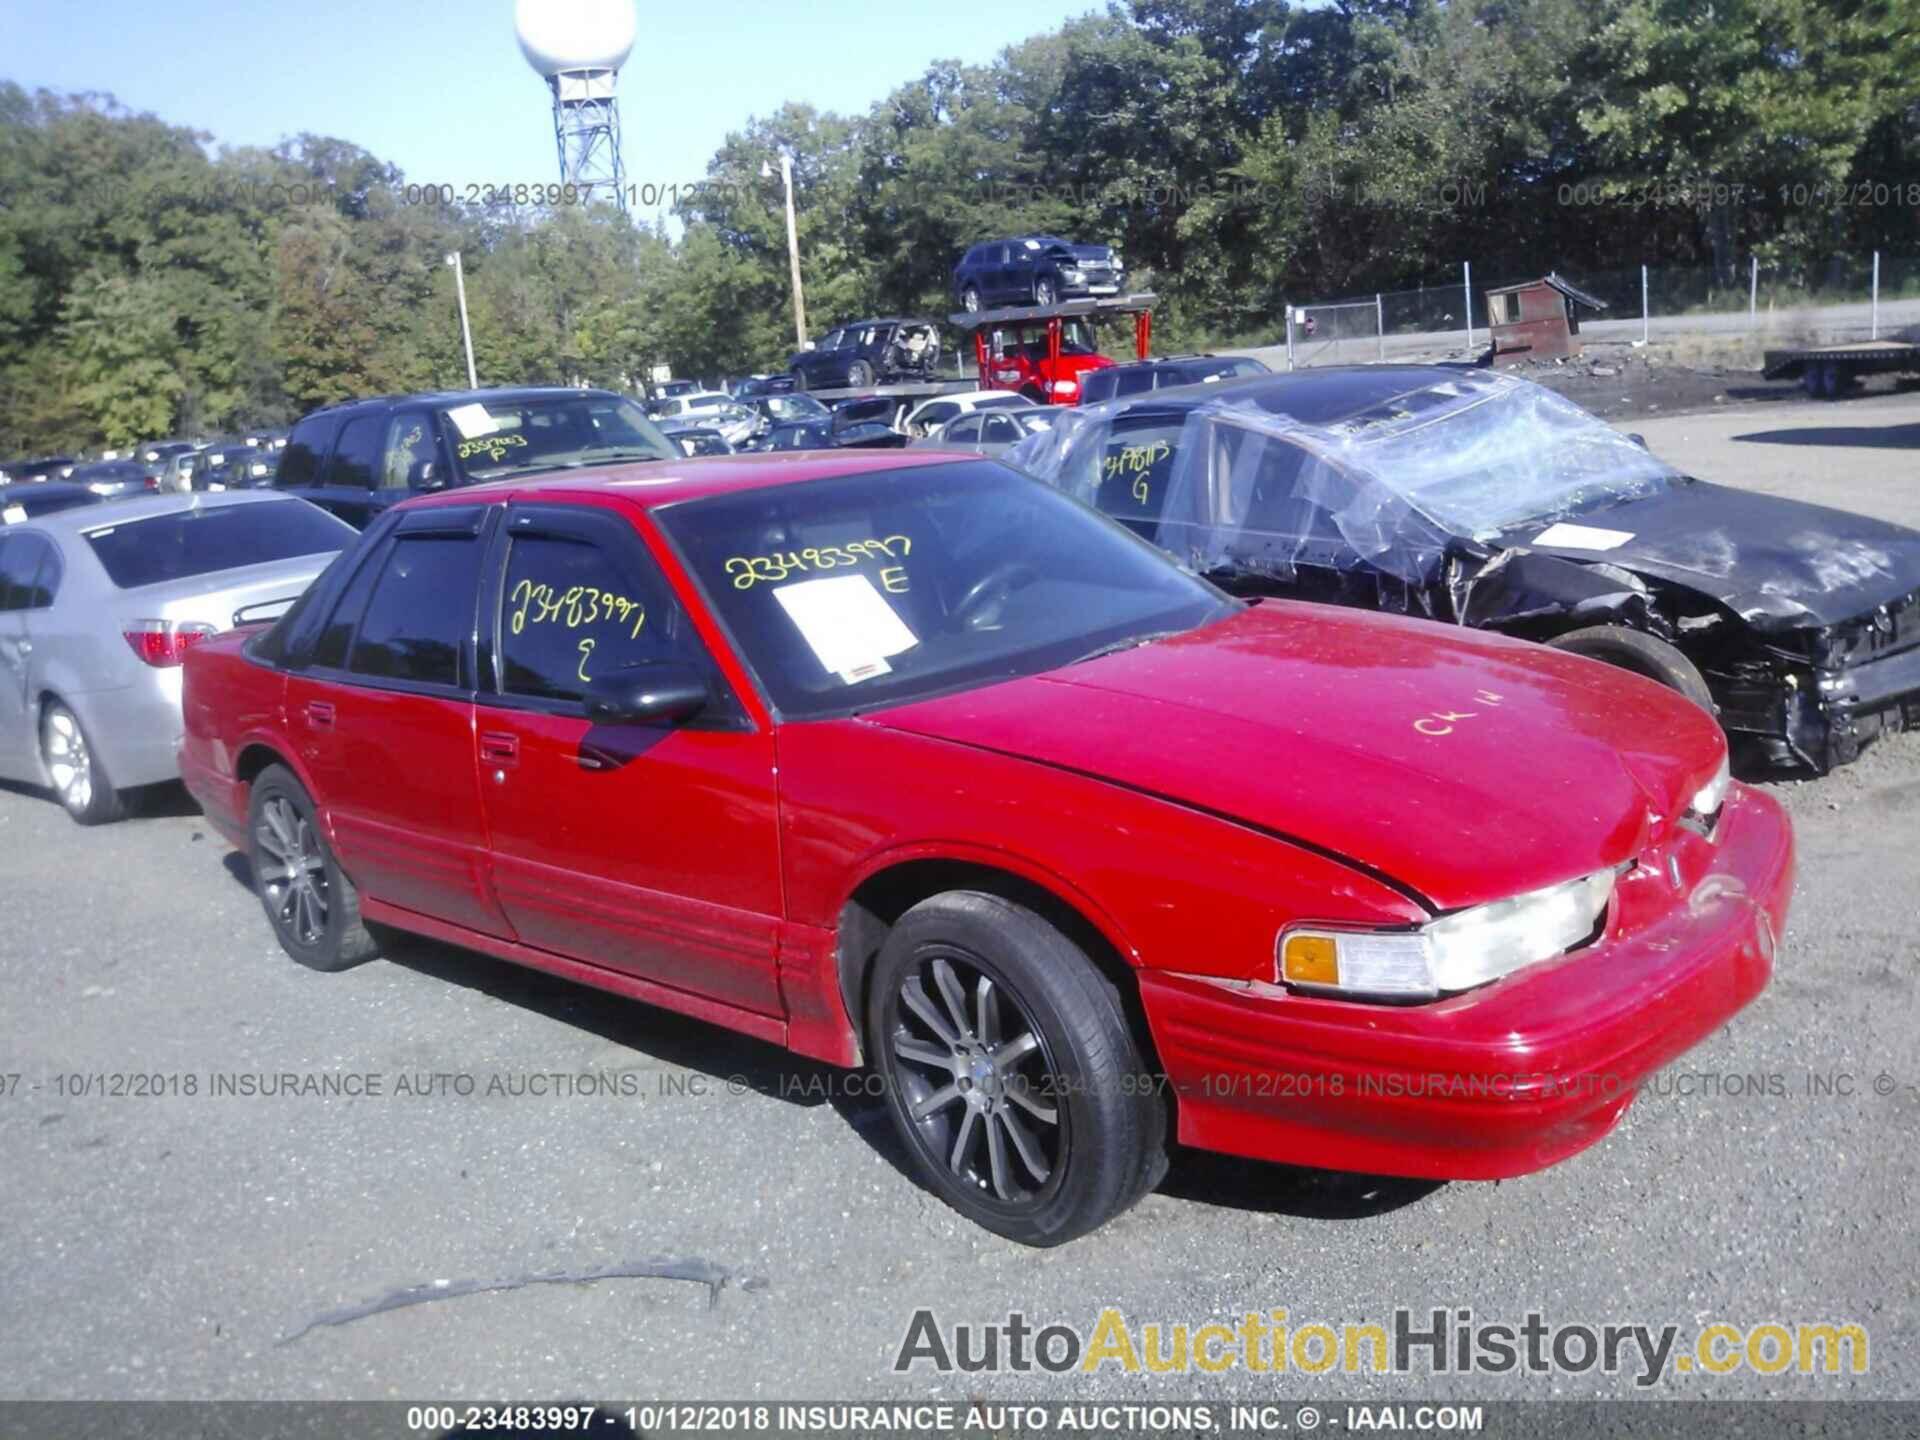 1996 OLDSMOBILE CUTLASS SUP, 1G3WH52M2TF376569